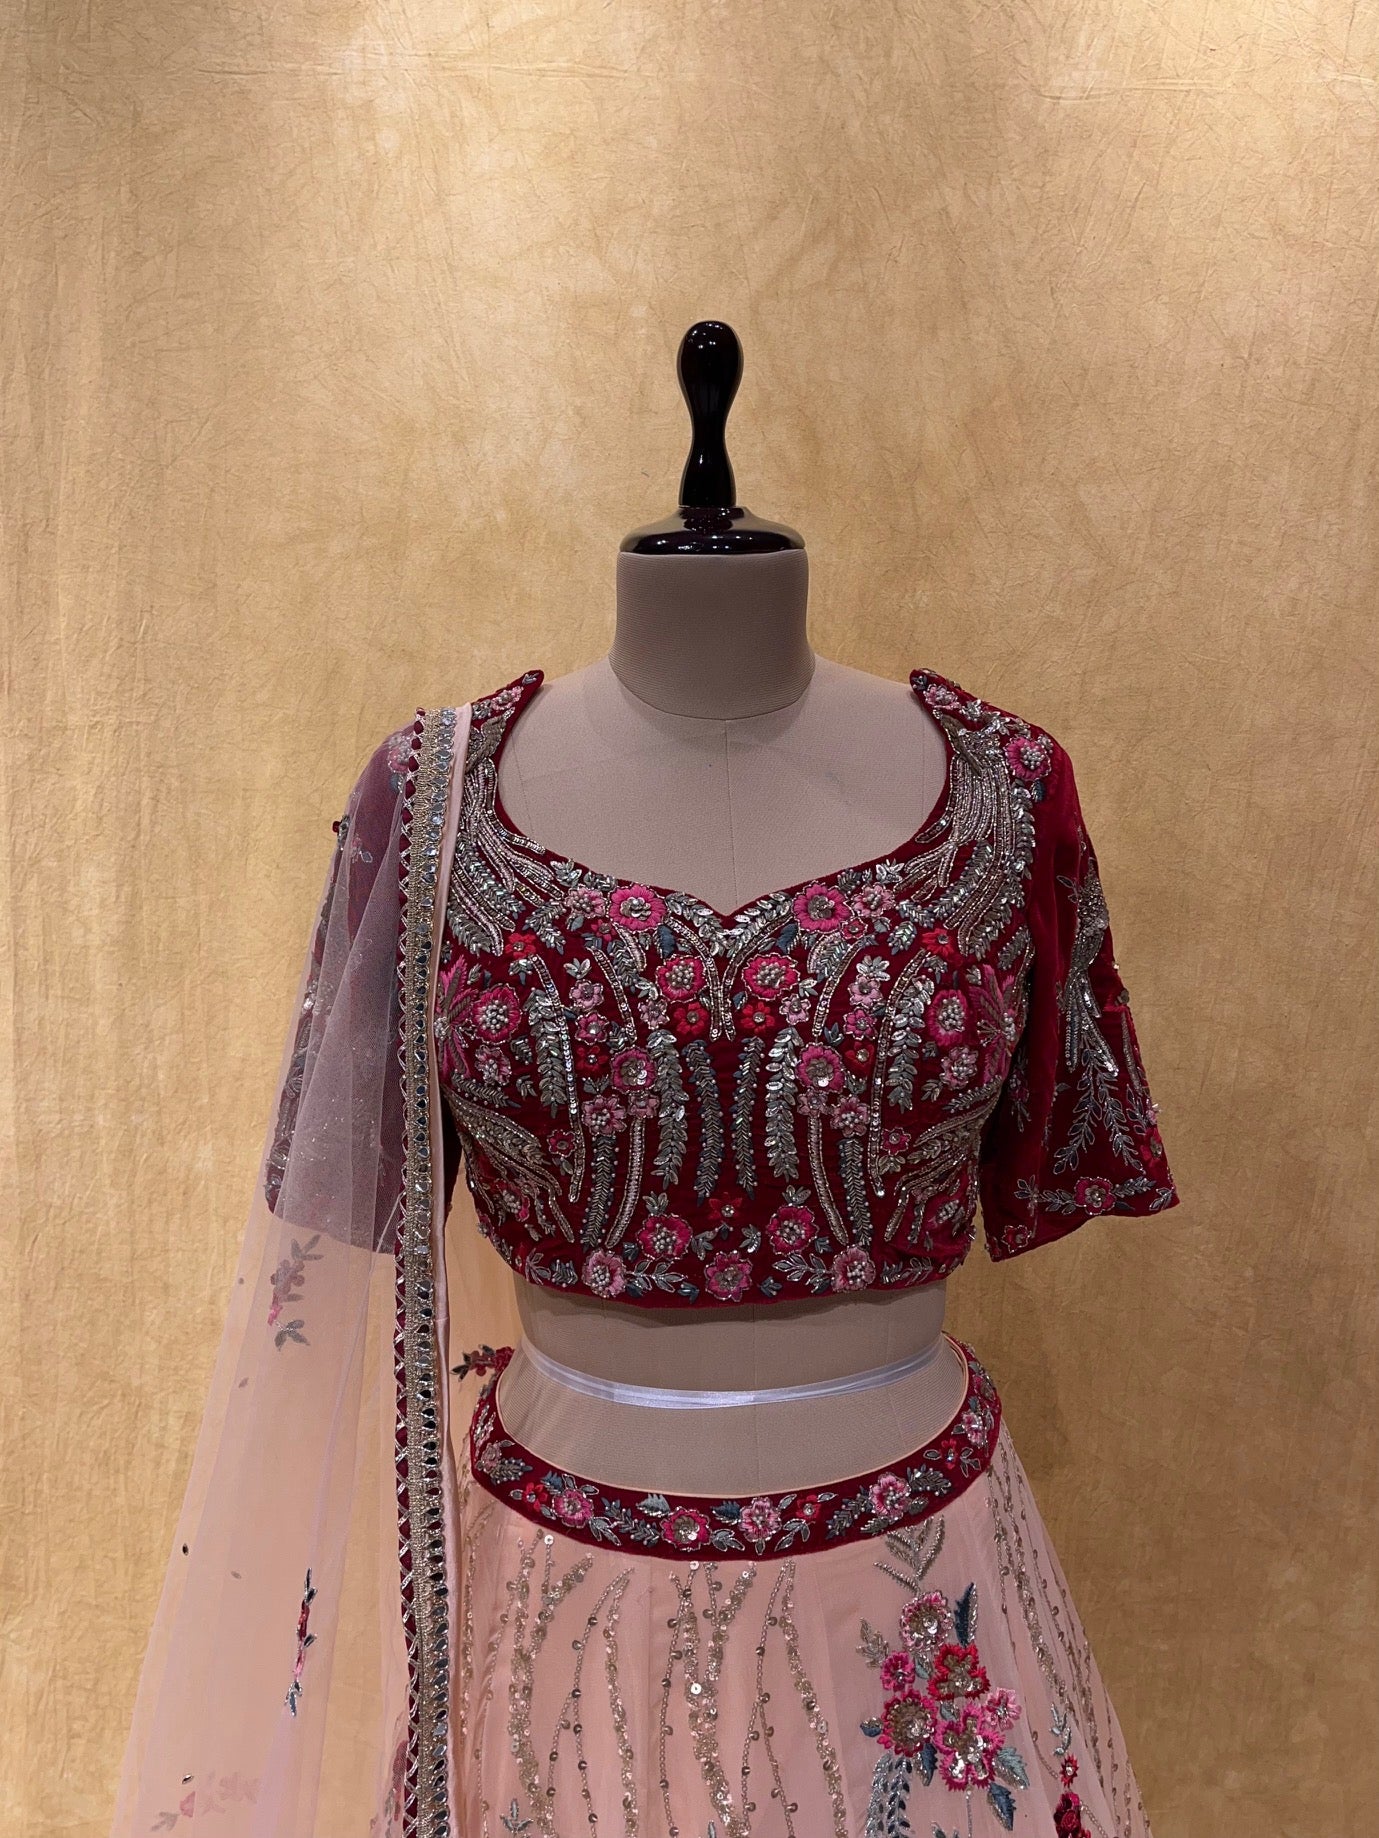 (DELIVERY IN 20 DAYS) BRIDESMAIDS READYMADE PEACH COLOUR GEORGETTE LEHENGA WITH MAROON VELVET CROP TOP BLOUSE EMBELLISHED WITH CUTDANA, SEQUINS & RESHAM WORK.